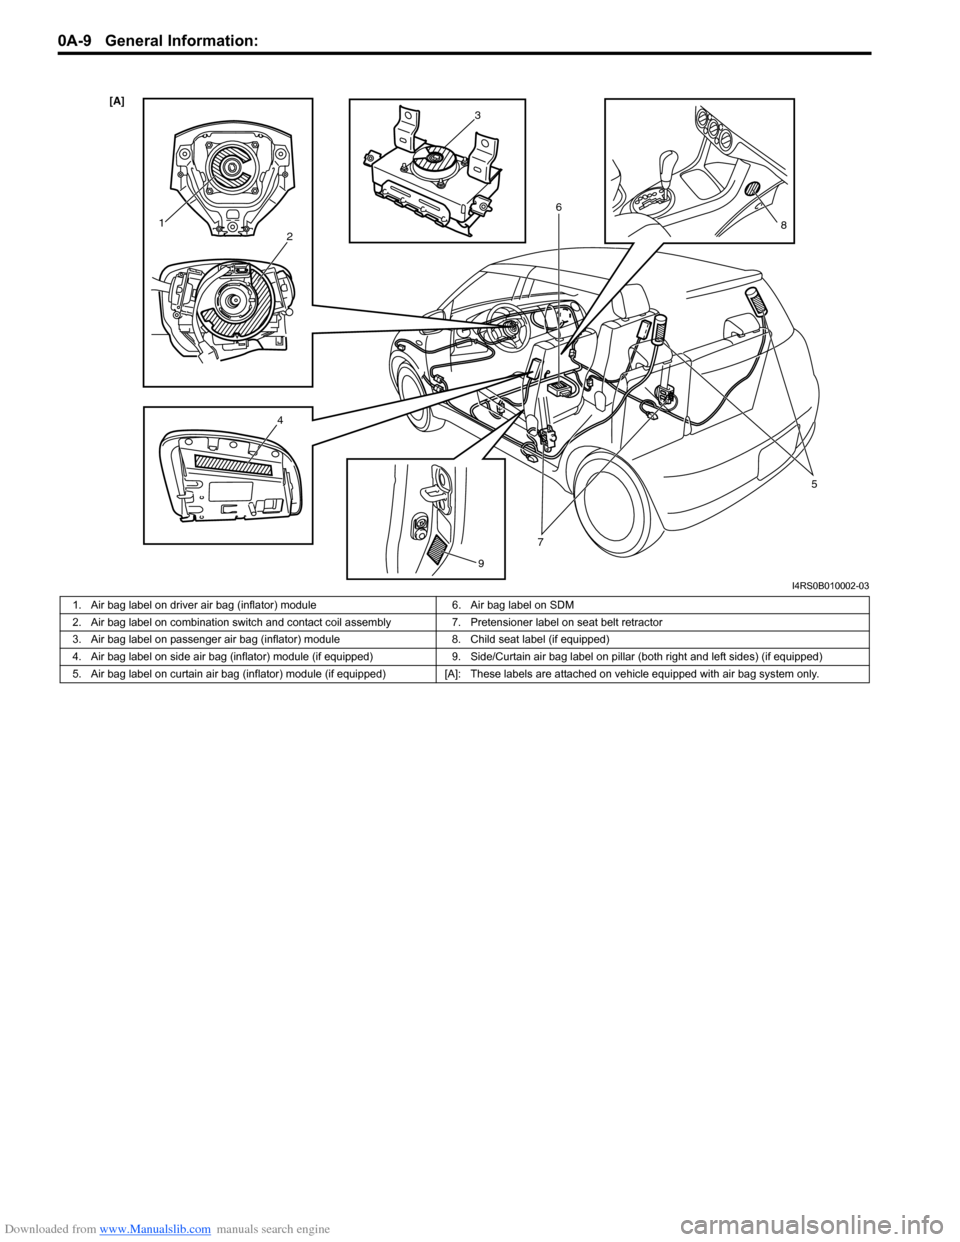 SUZUKI SWIFT 2004 2.G Service Owners Manual Downloaded from www.Manualslib.com manuals search engine 0A-9 General Information: 
[A] 
12
4 5
6
7 8
9
3
I4RS0B010002-03
1. Air bag label on driver air bag (inflator) module 6. Air bag label on SDM
2